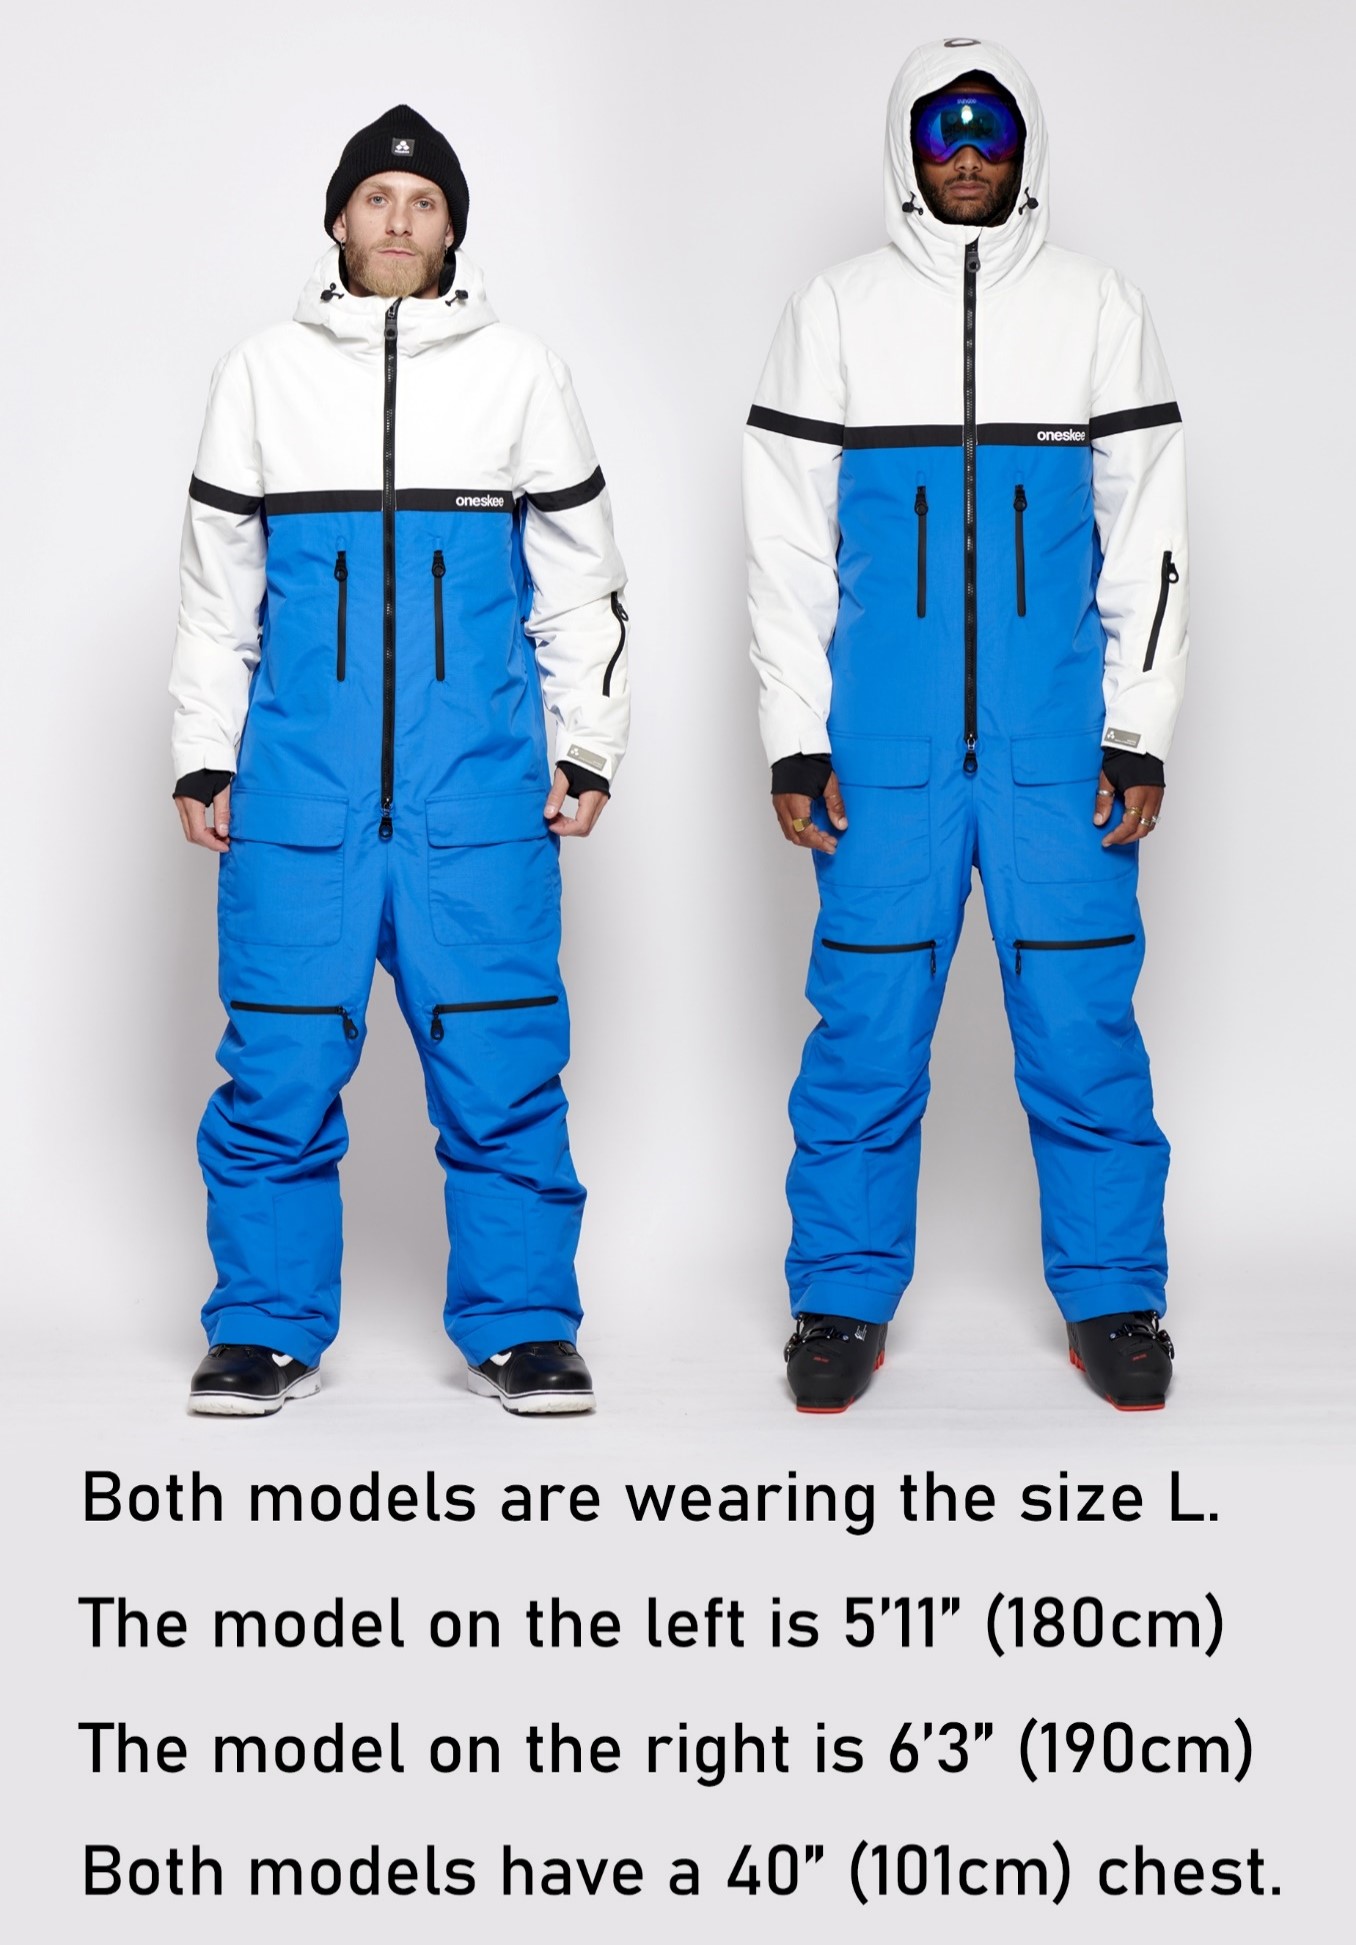 Two males modelling Ski Suits, both models are wearing the size L. The model on the left is 5'11" (180cm) The model on the right is 6'3" (190cm) Both models have a 40" (101cm) chest.